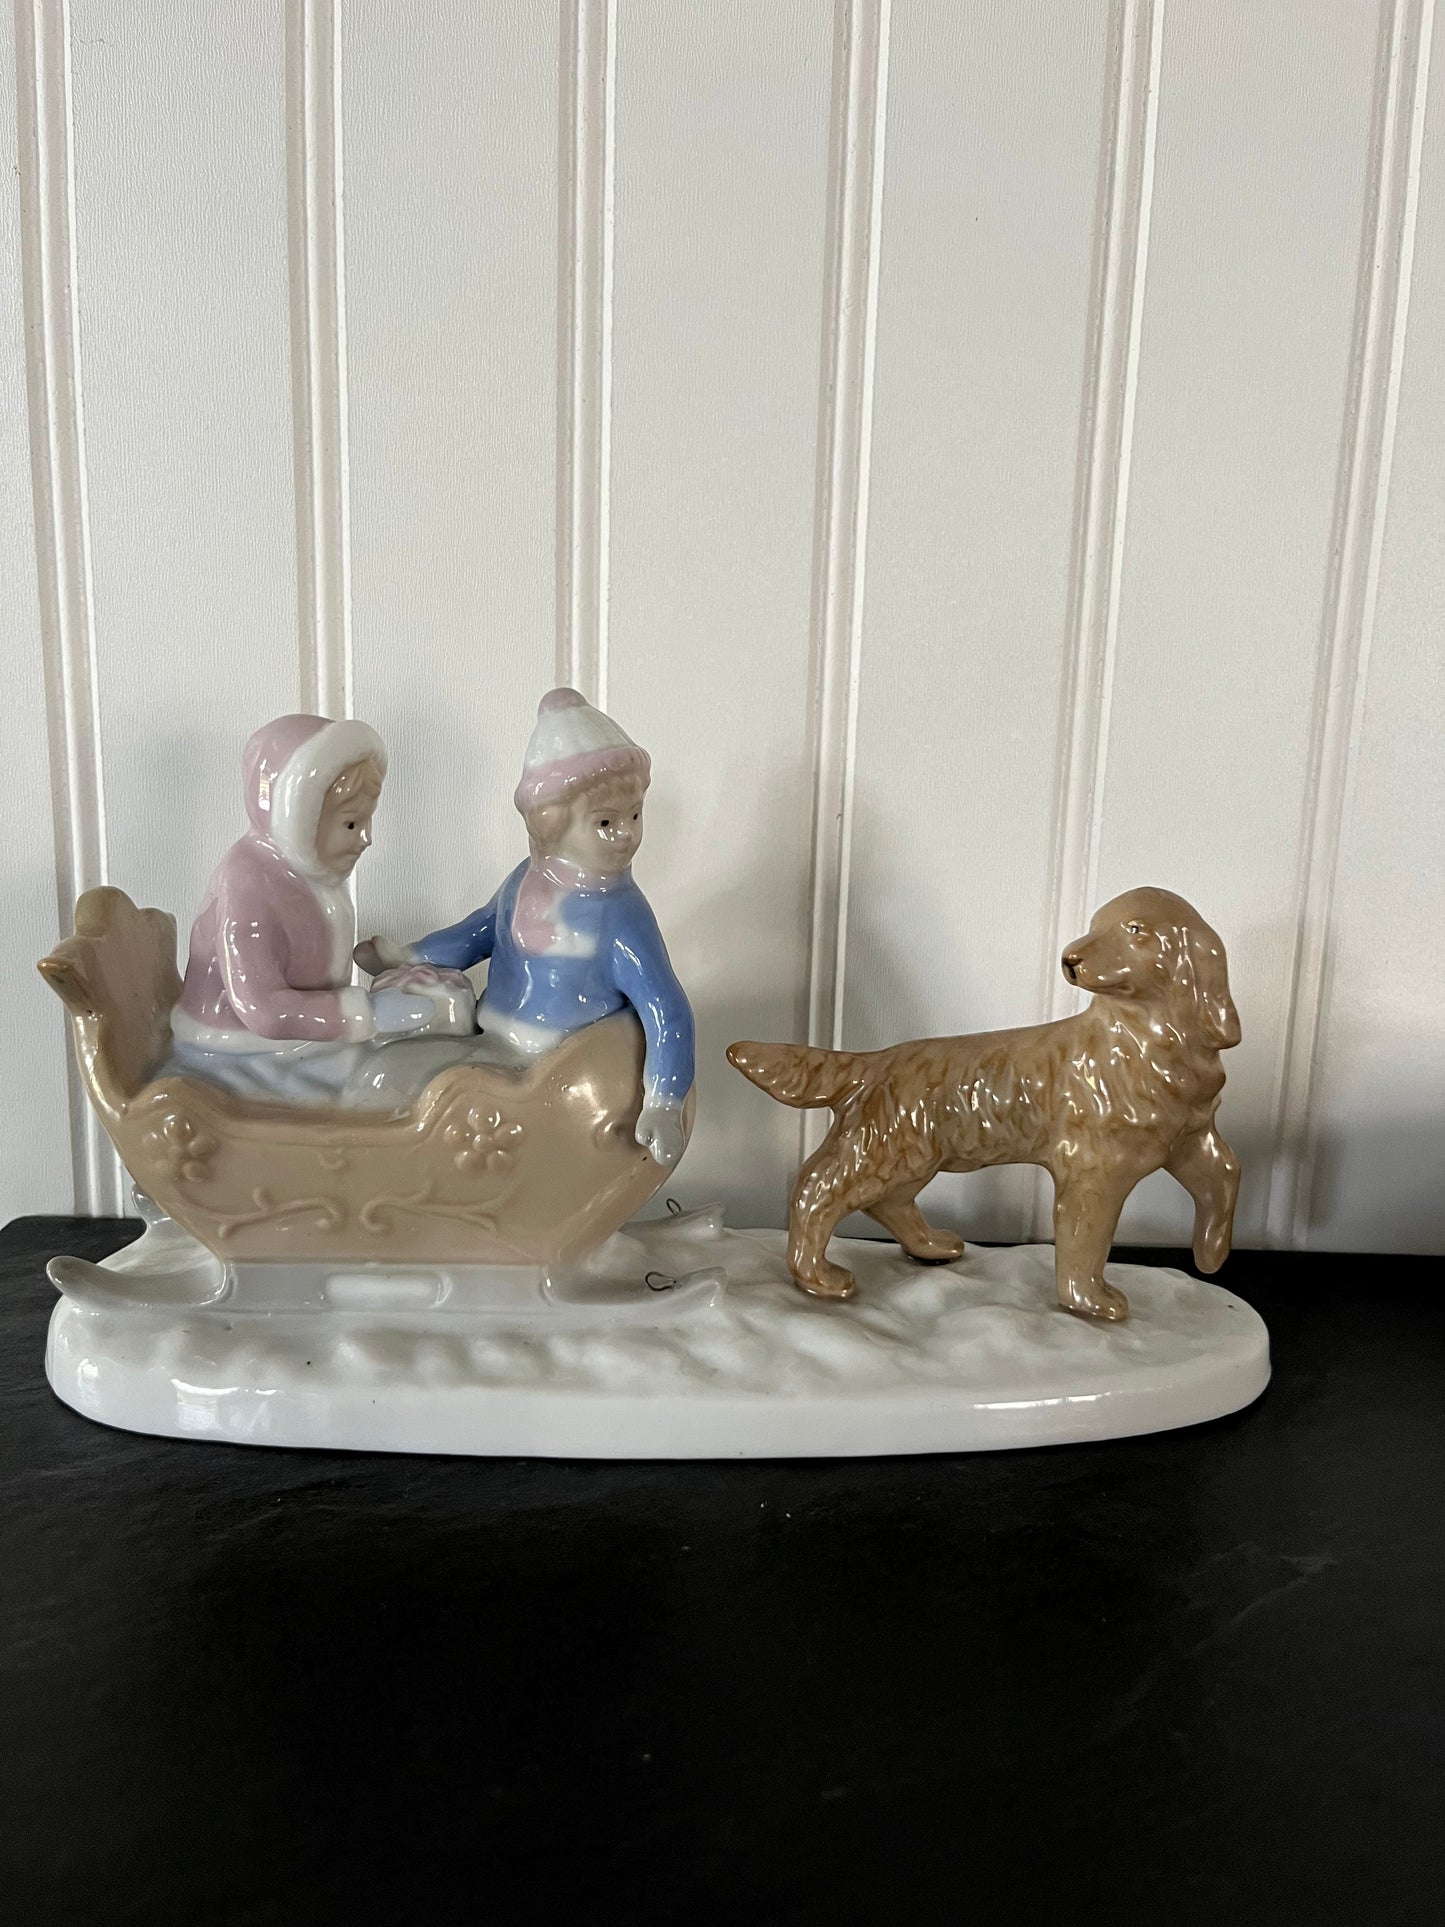 Vintage Porcelain Girl and Boy with Dog on Sleigh Ride Winter Scene Figurine - Meico Inc - 8.5" Width - Collectible Decor